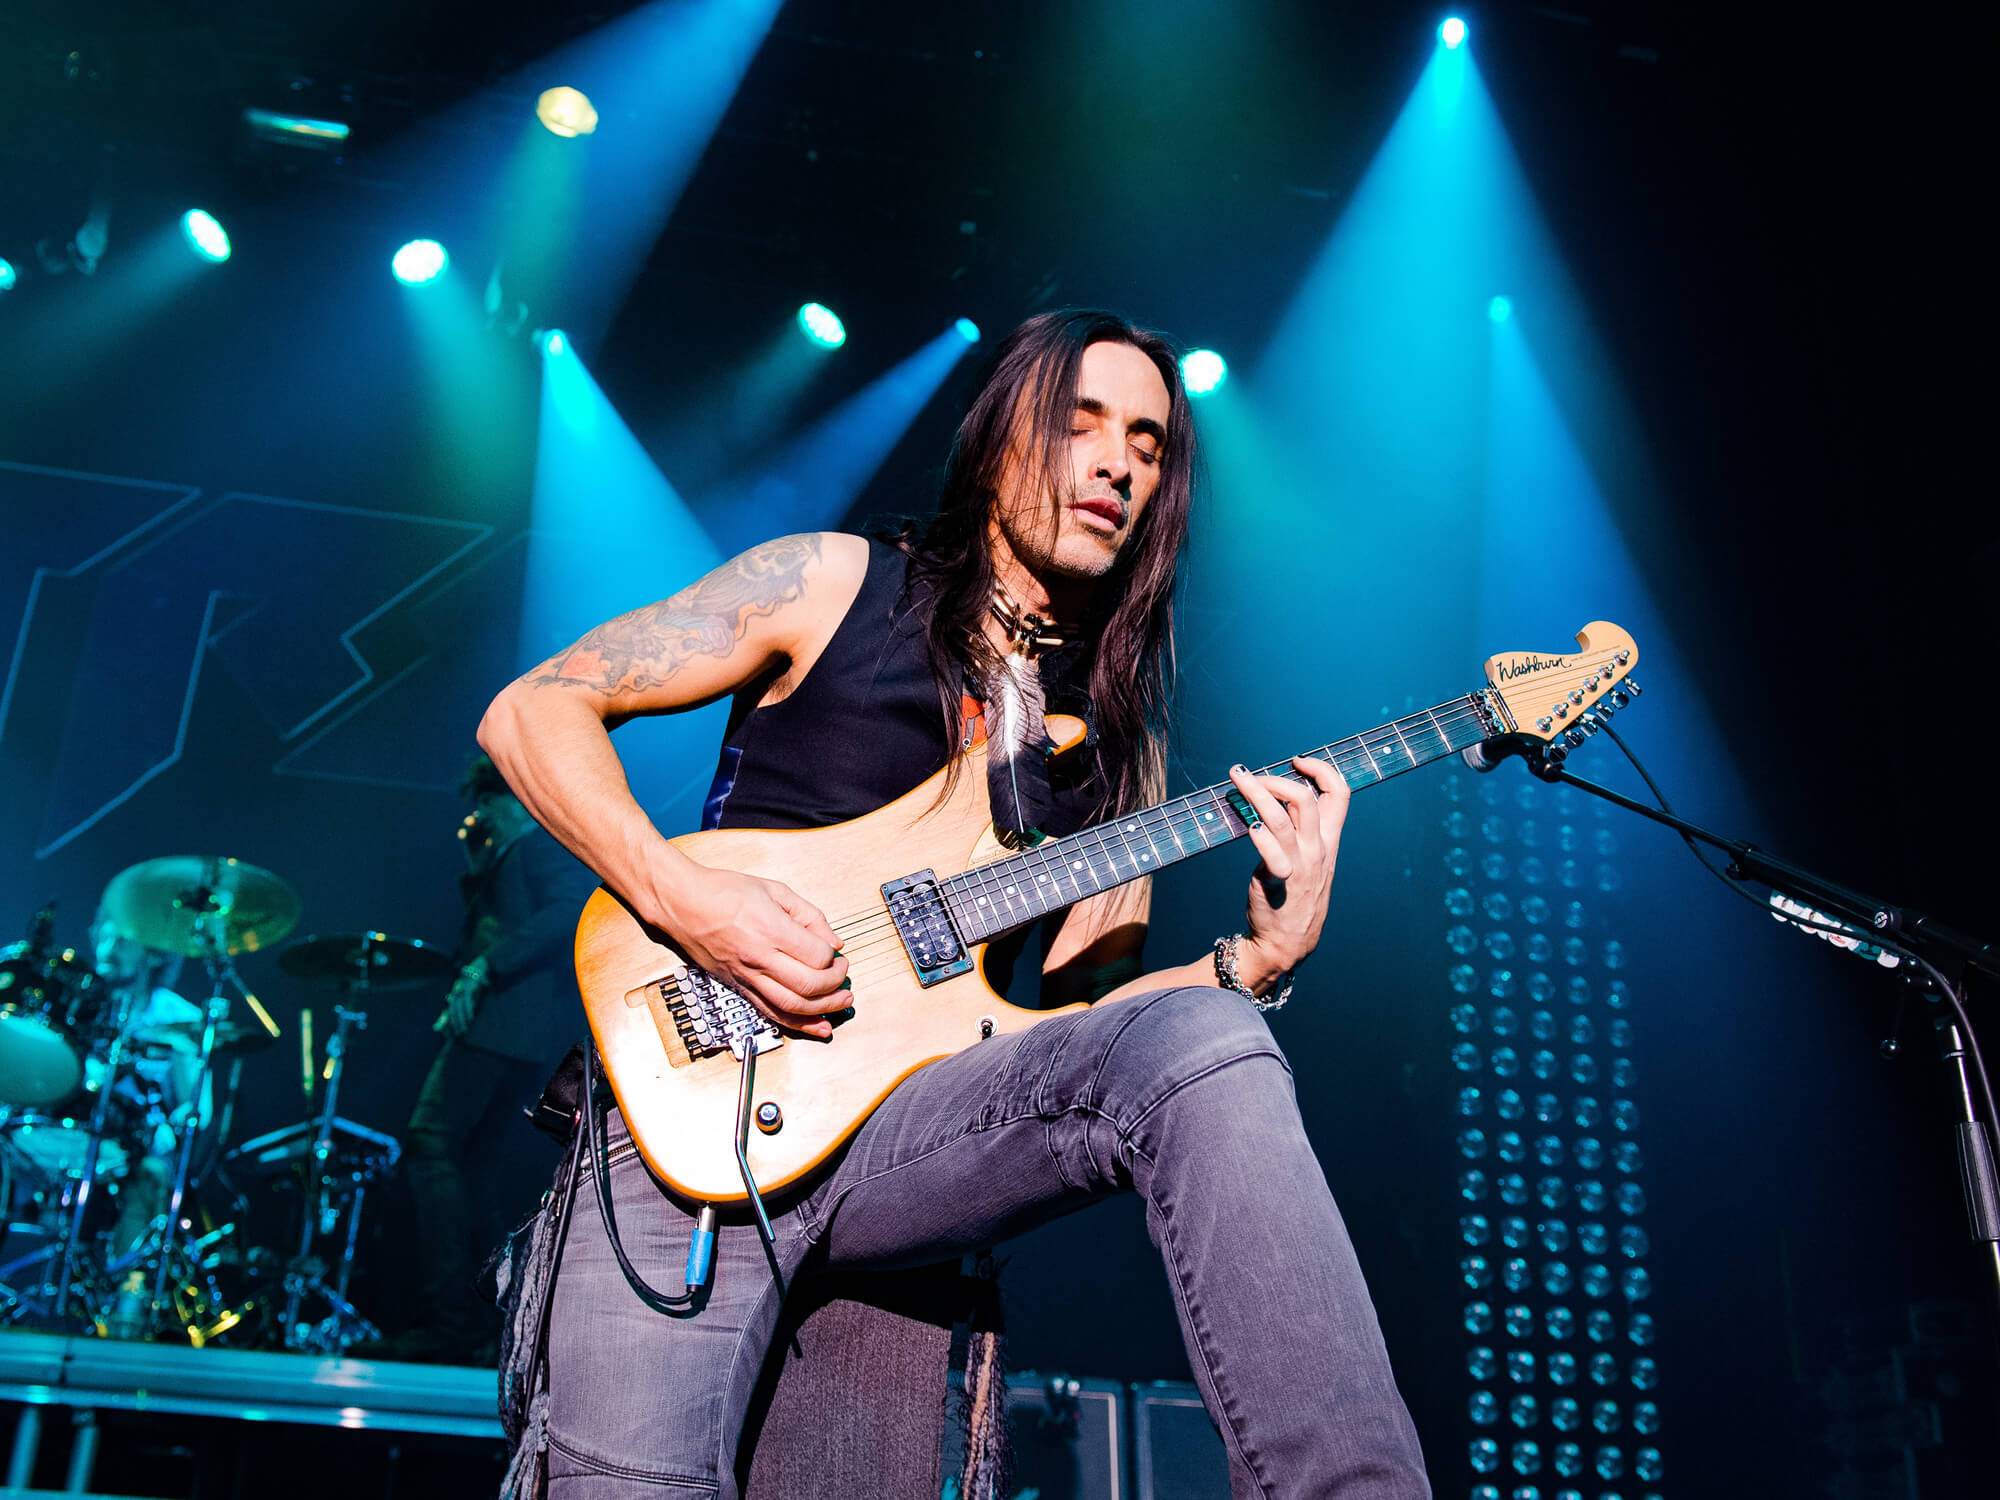 Prince called Nuno Bettencourt one of "top three guitar players"